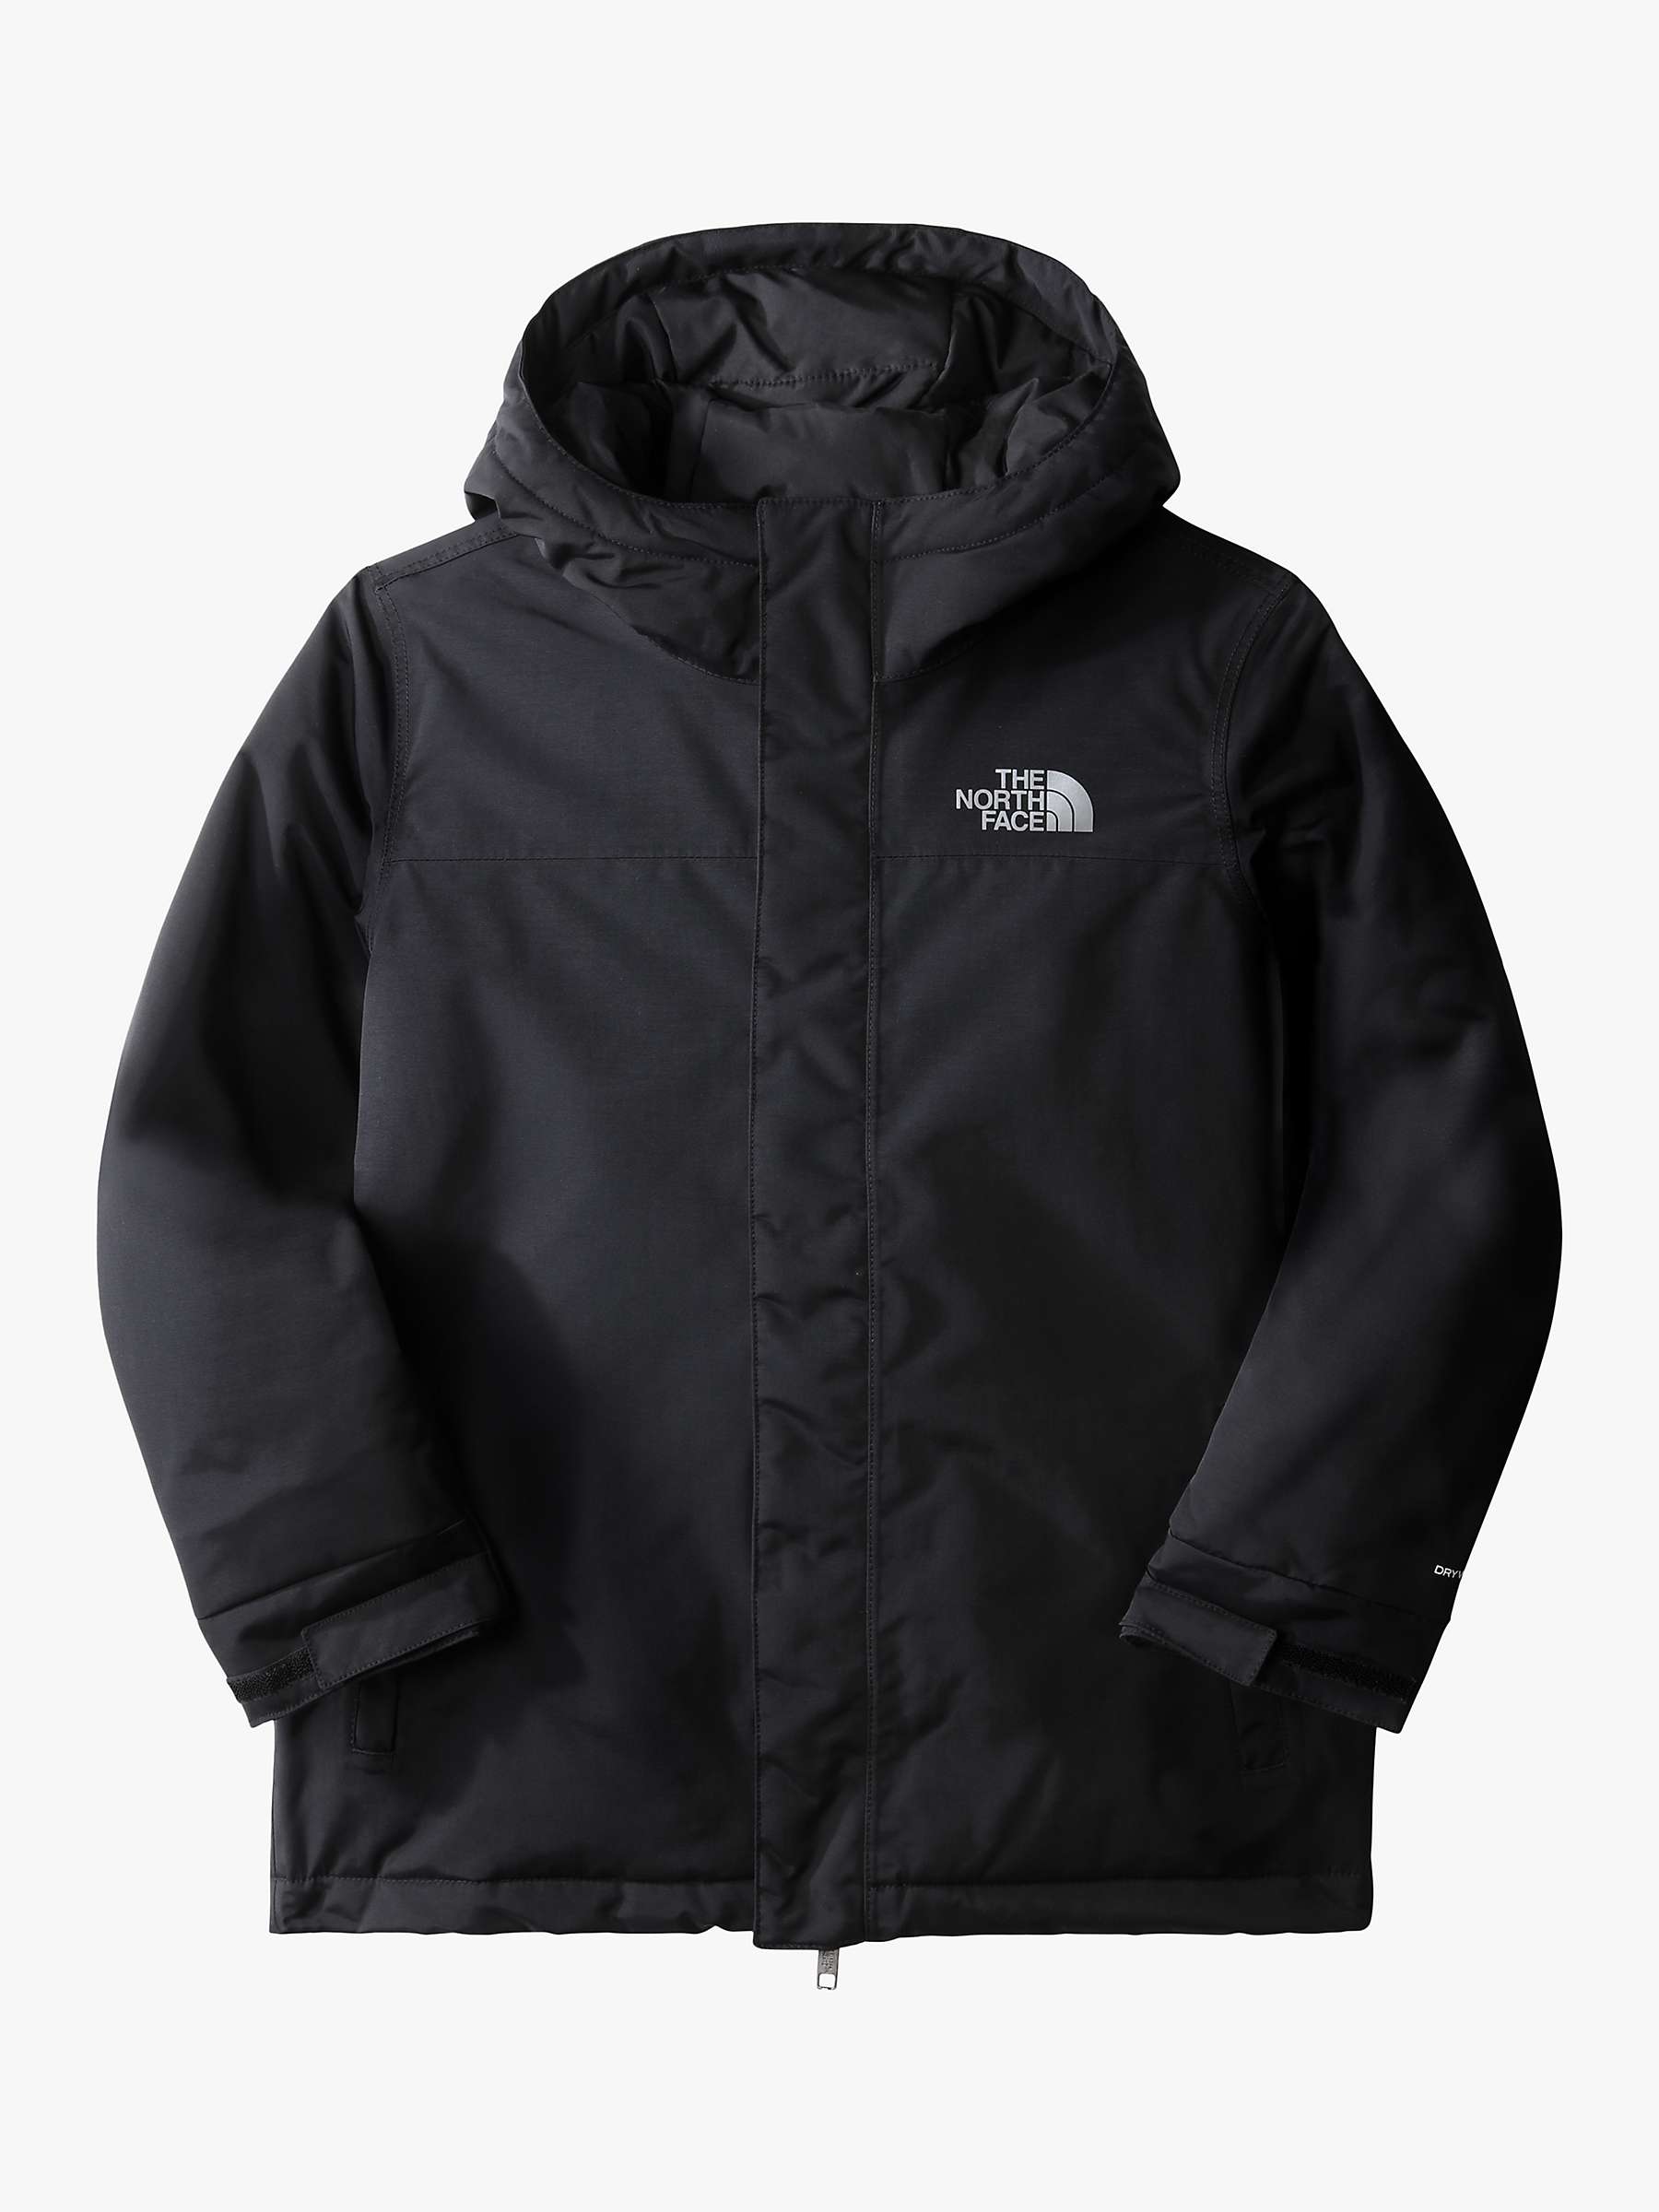 Buy The North Face Kids' Zaneck Insulated Weatherproof Parka, Black Online at johnlewis.com